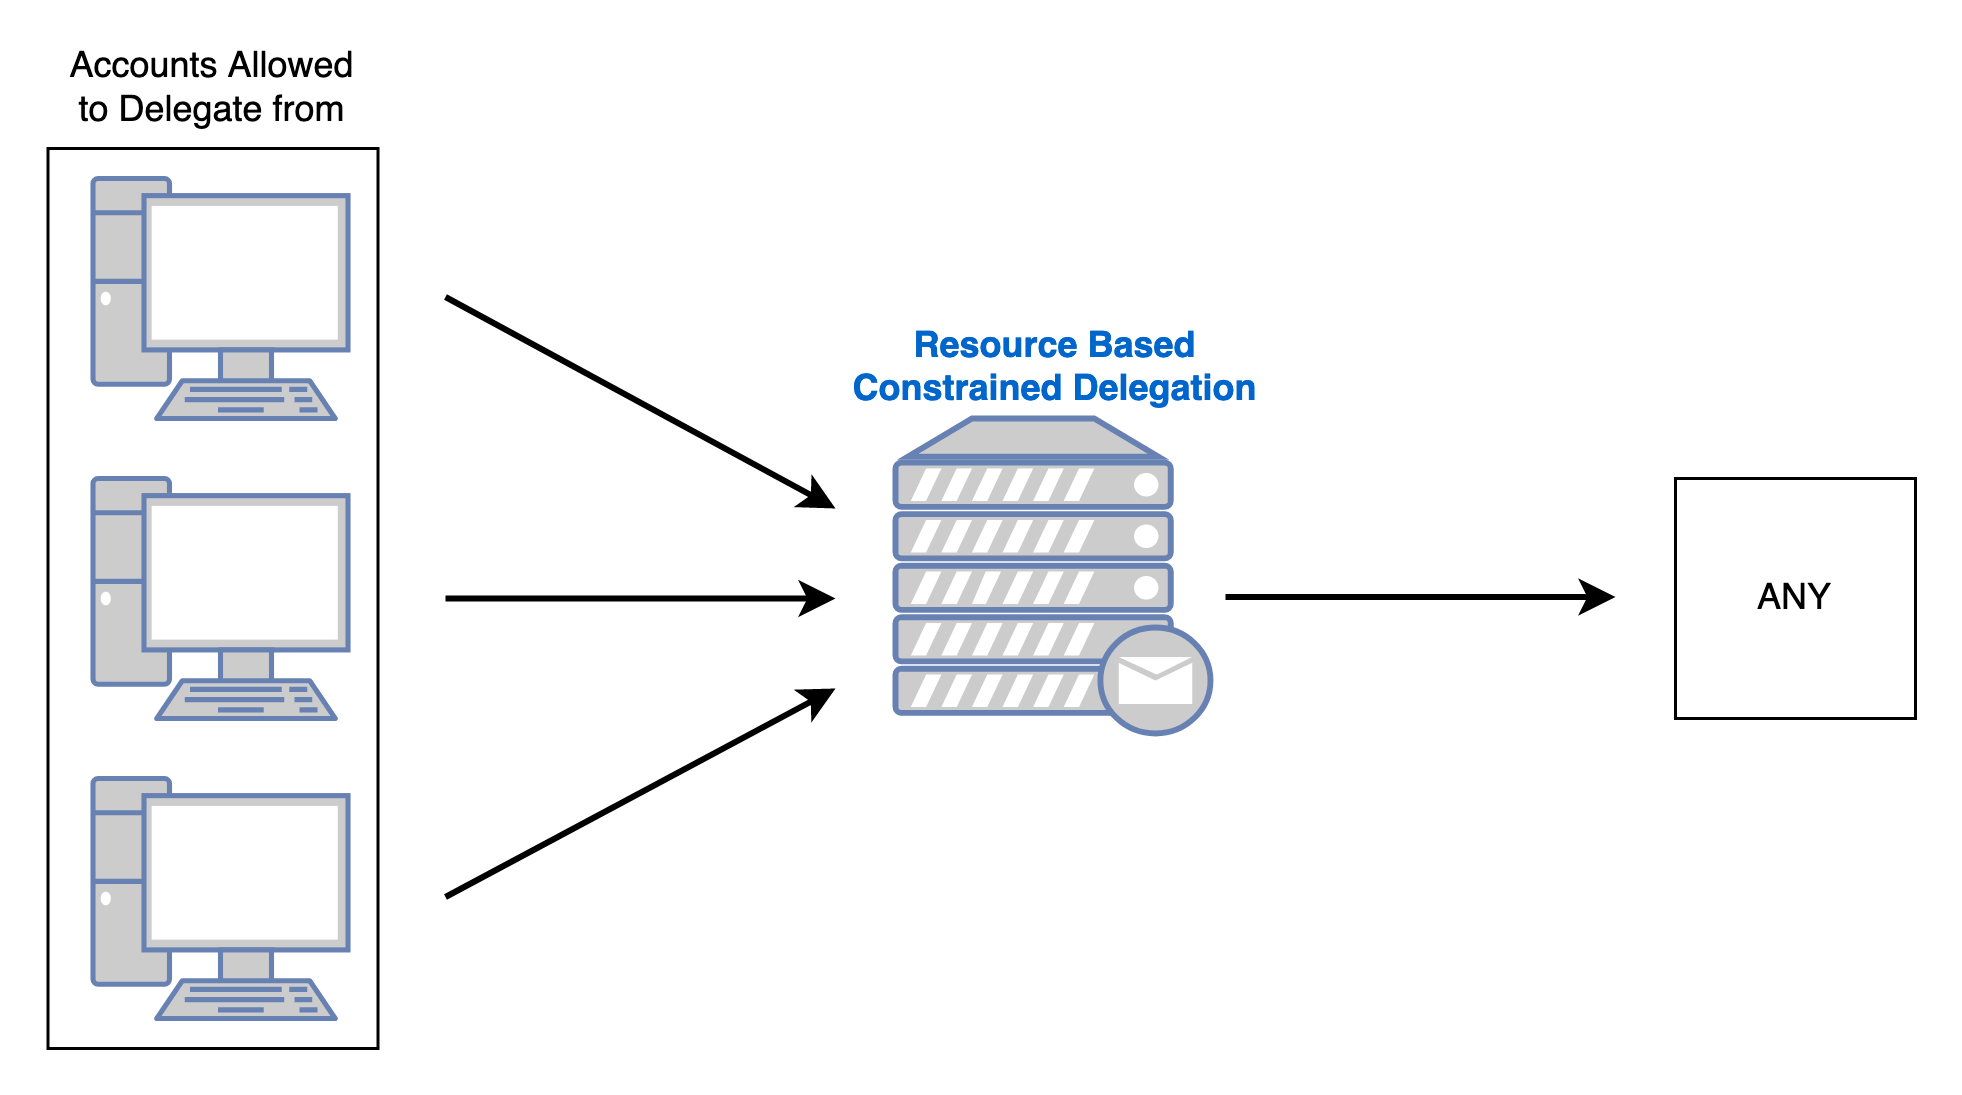 Resource-Based Constrained Delegation at a high level